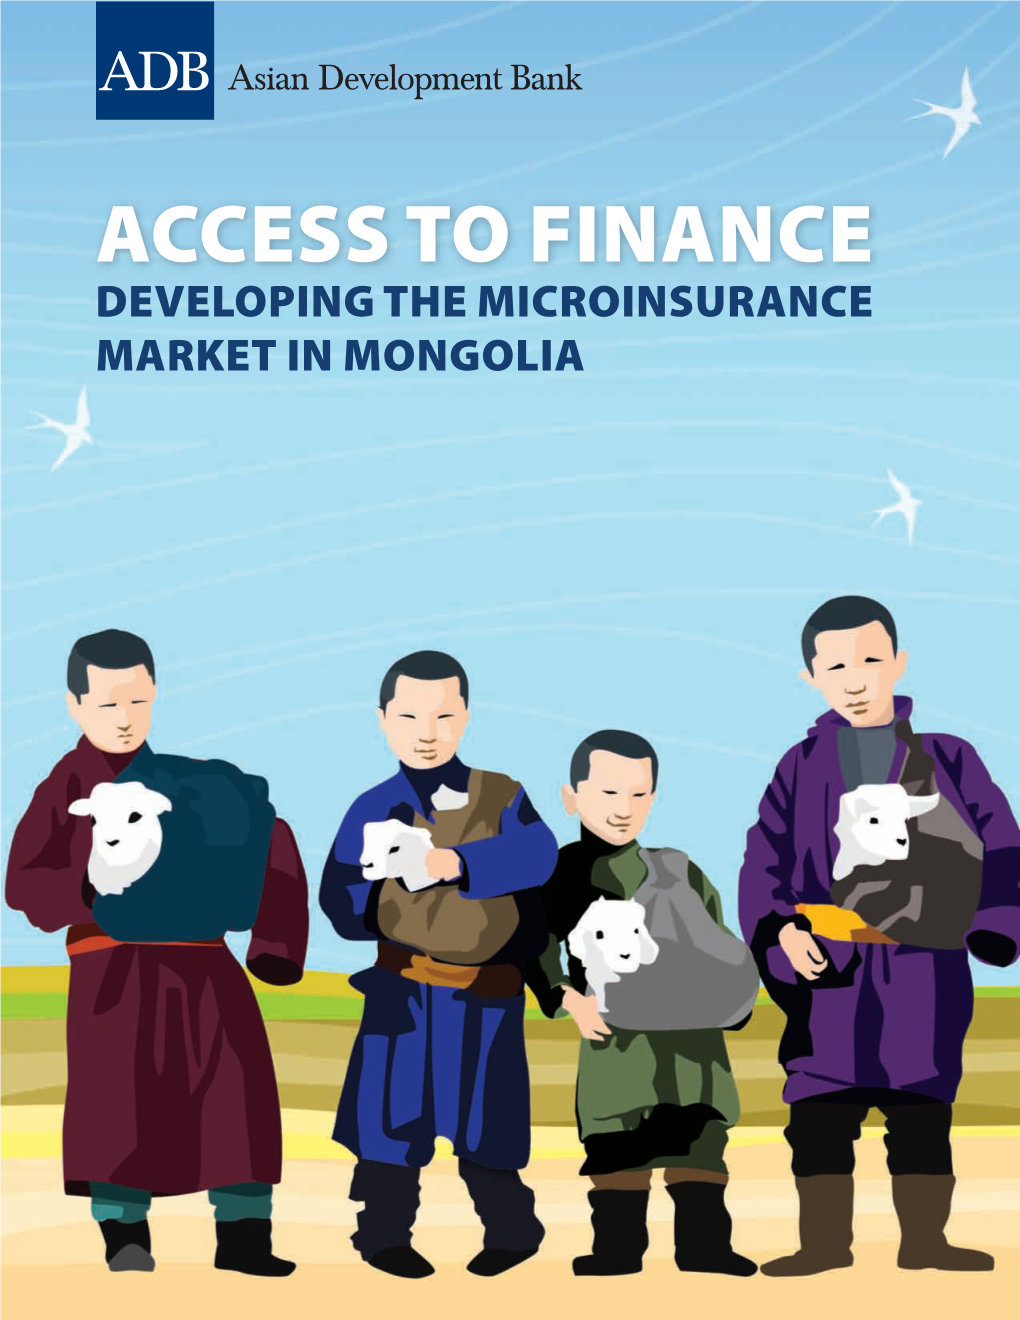 Access to Finance: Developing the Microinsurance Market in Mongolia